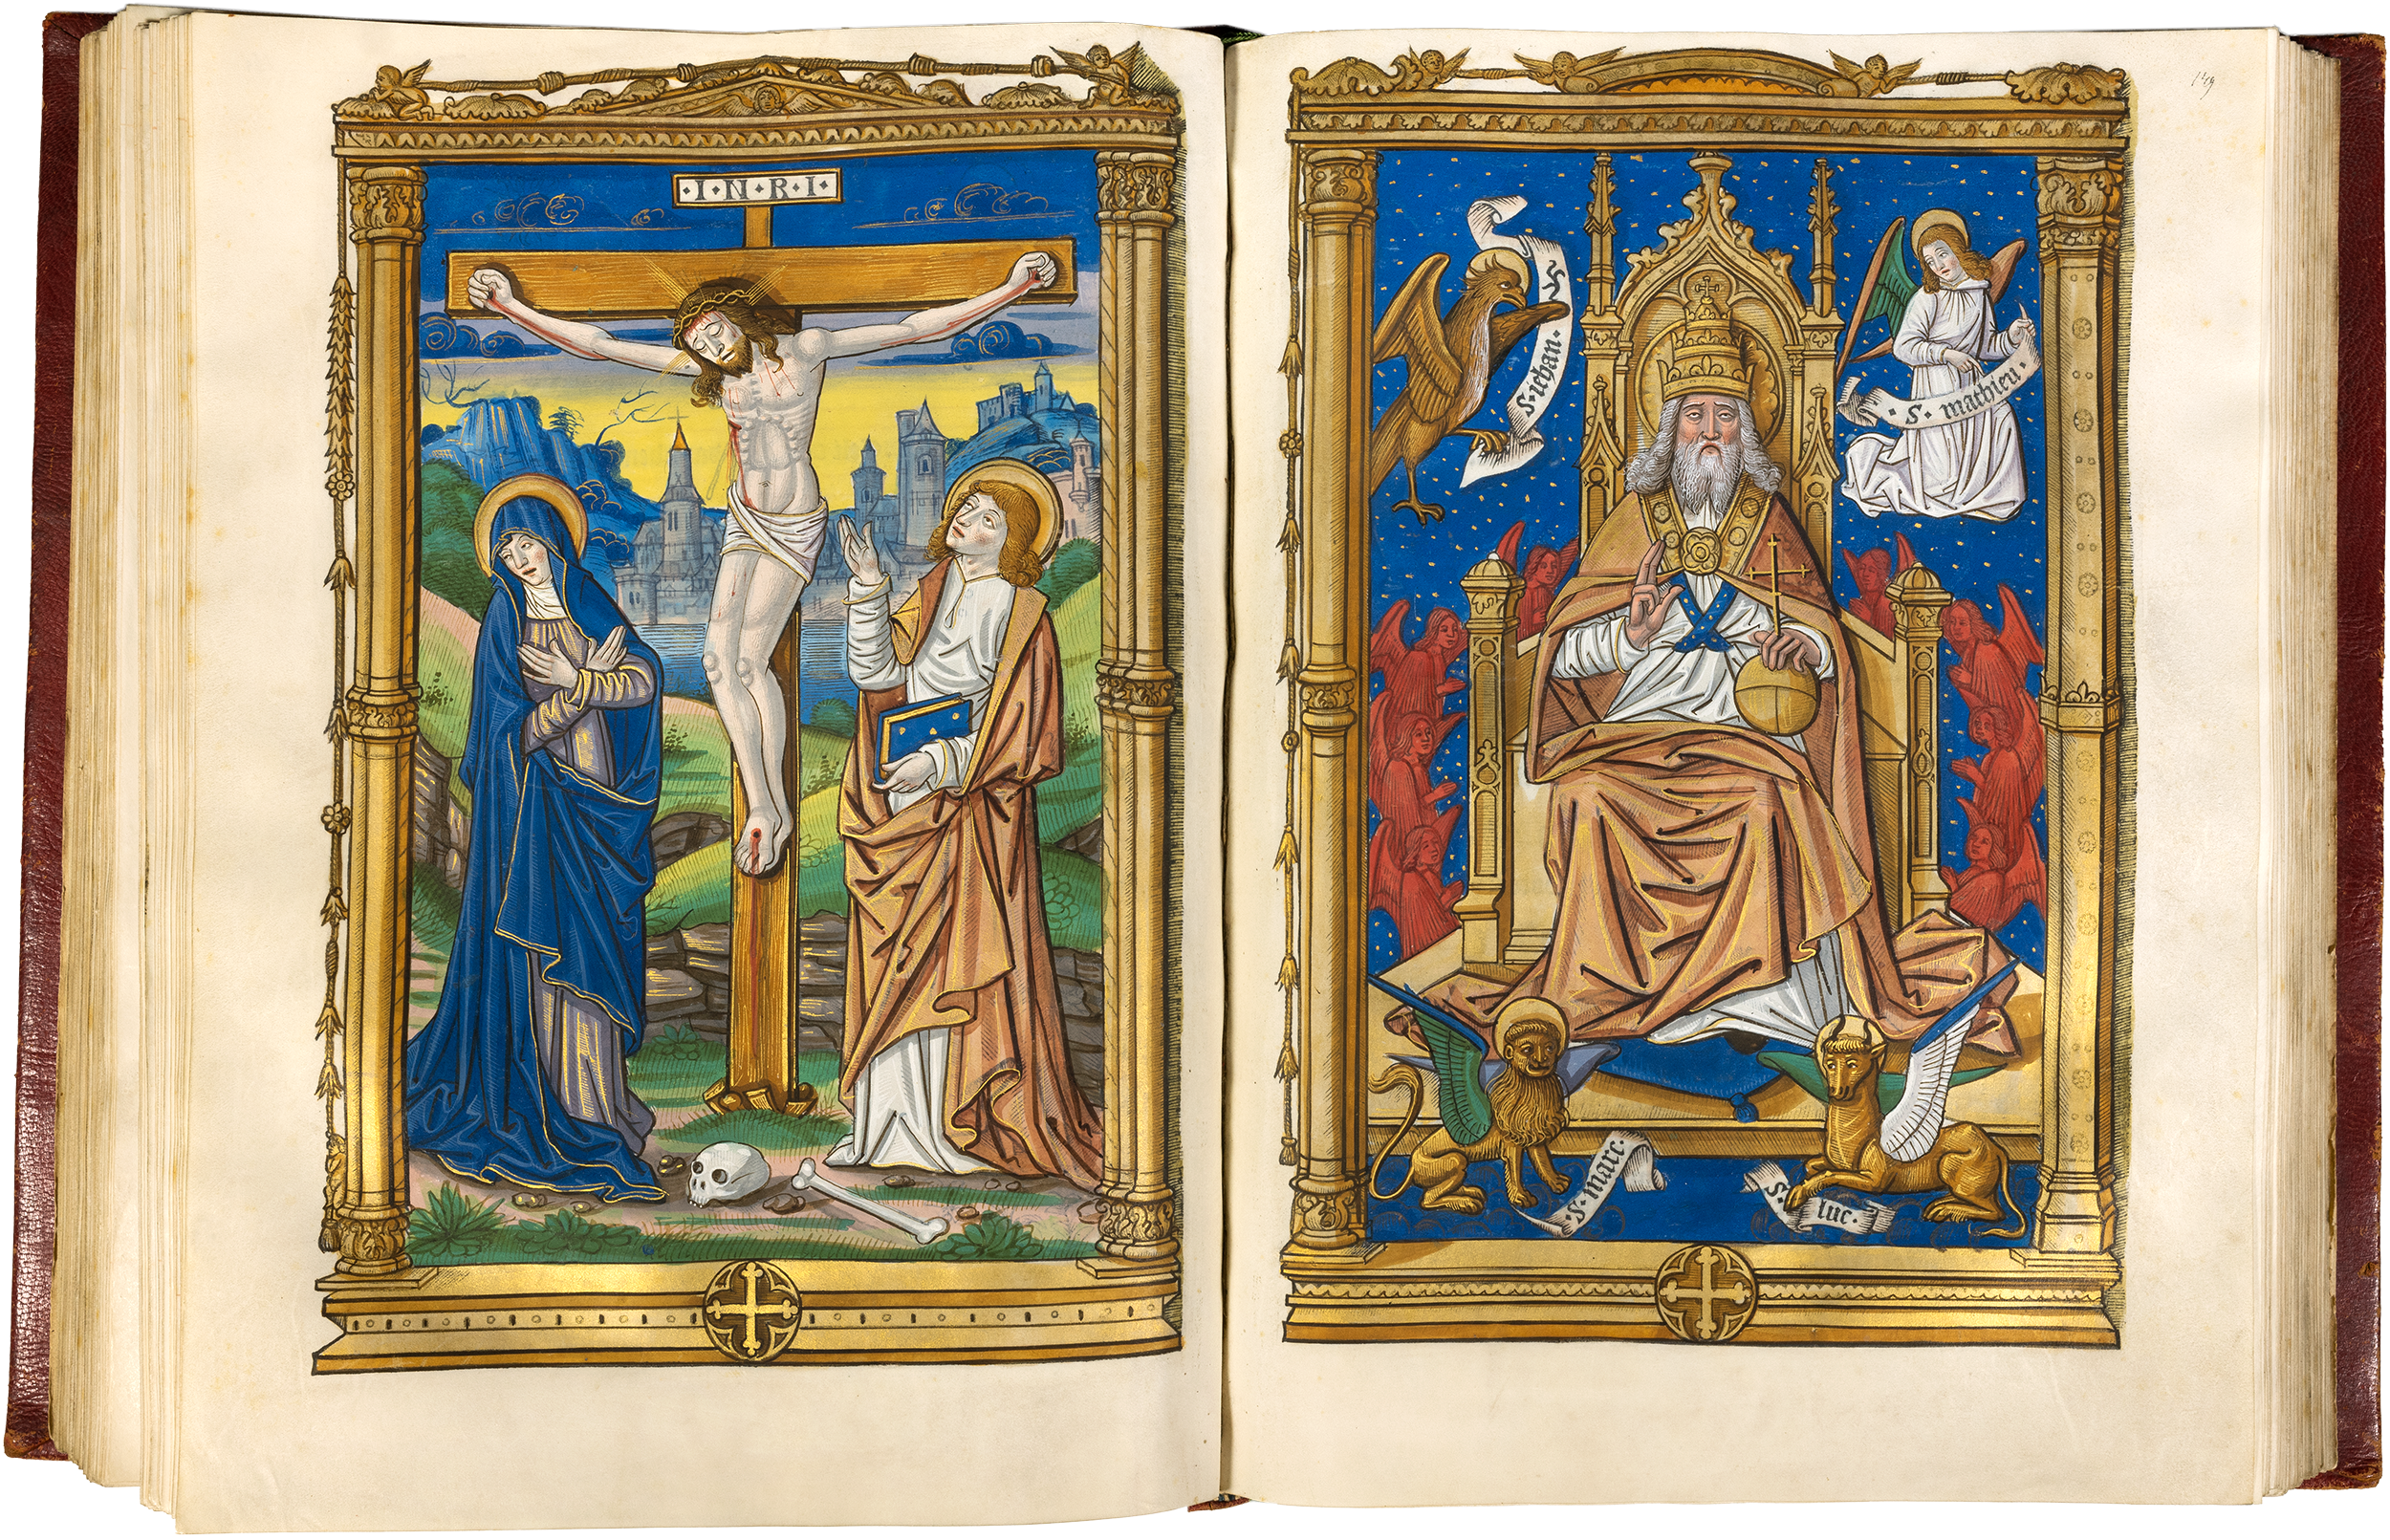 illuminated-missal-langres-1517-double-page-miniature-etienne-colaud-crucifixion.png